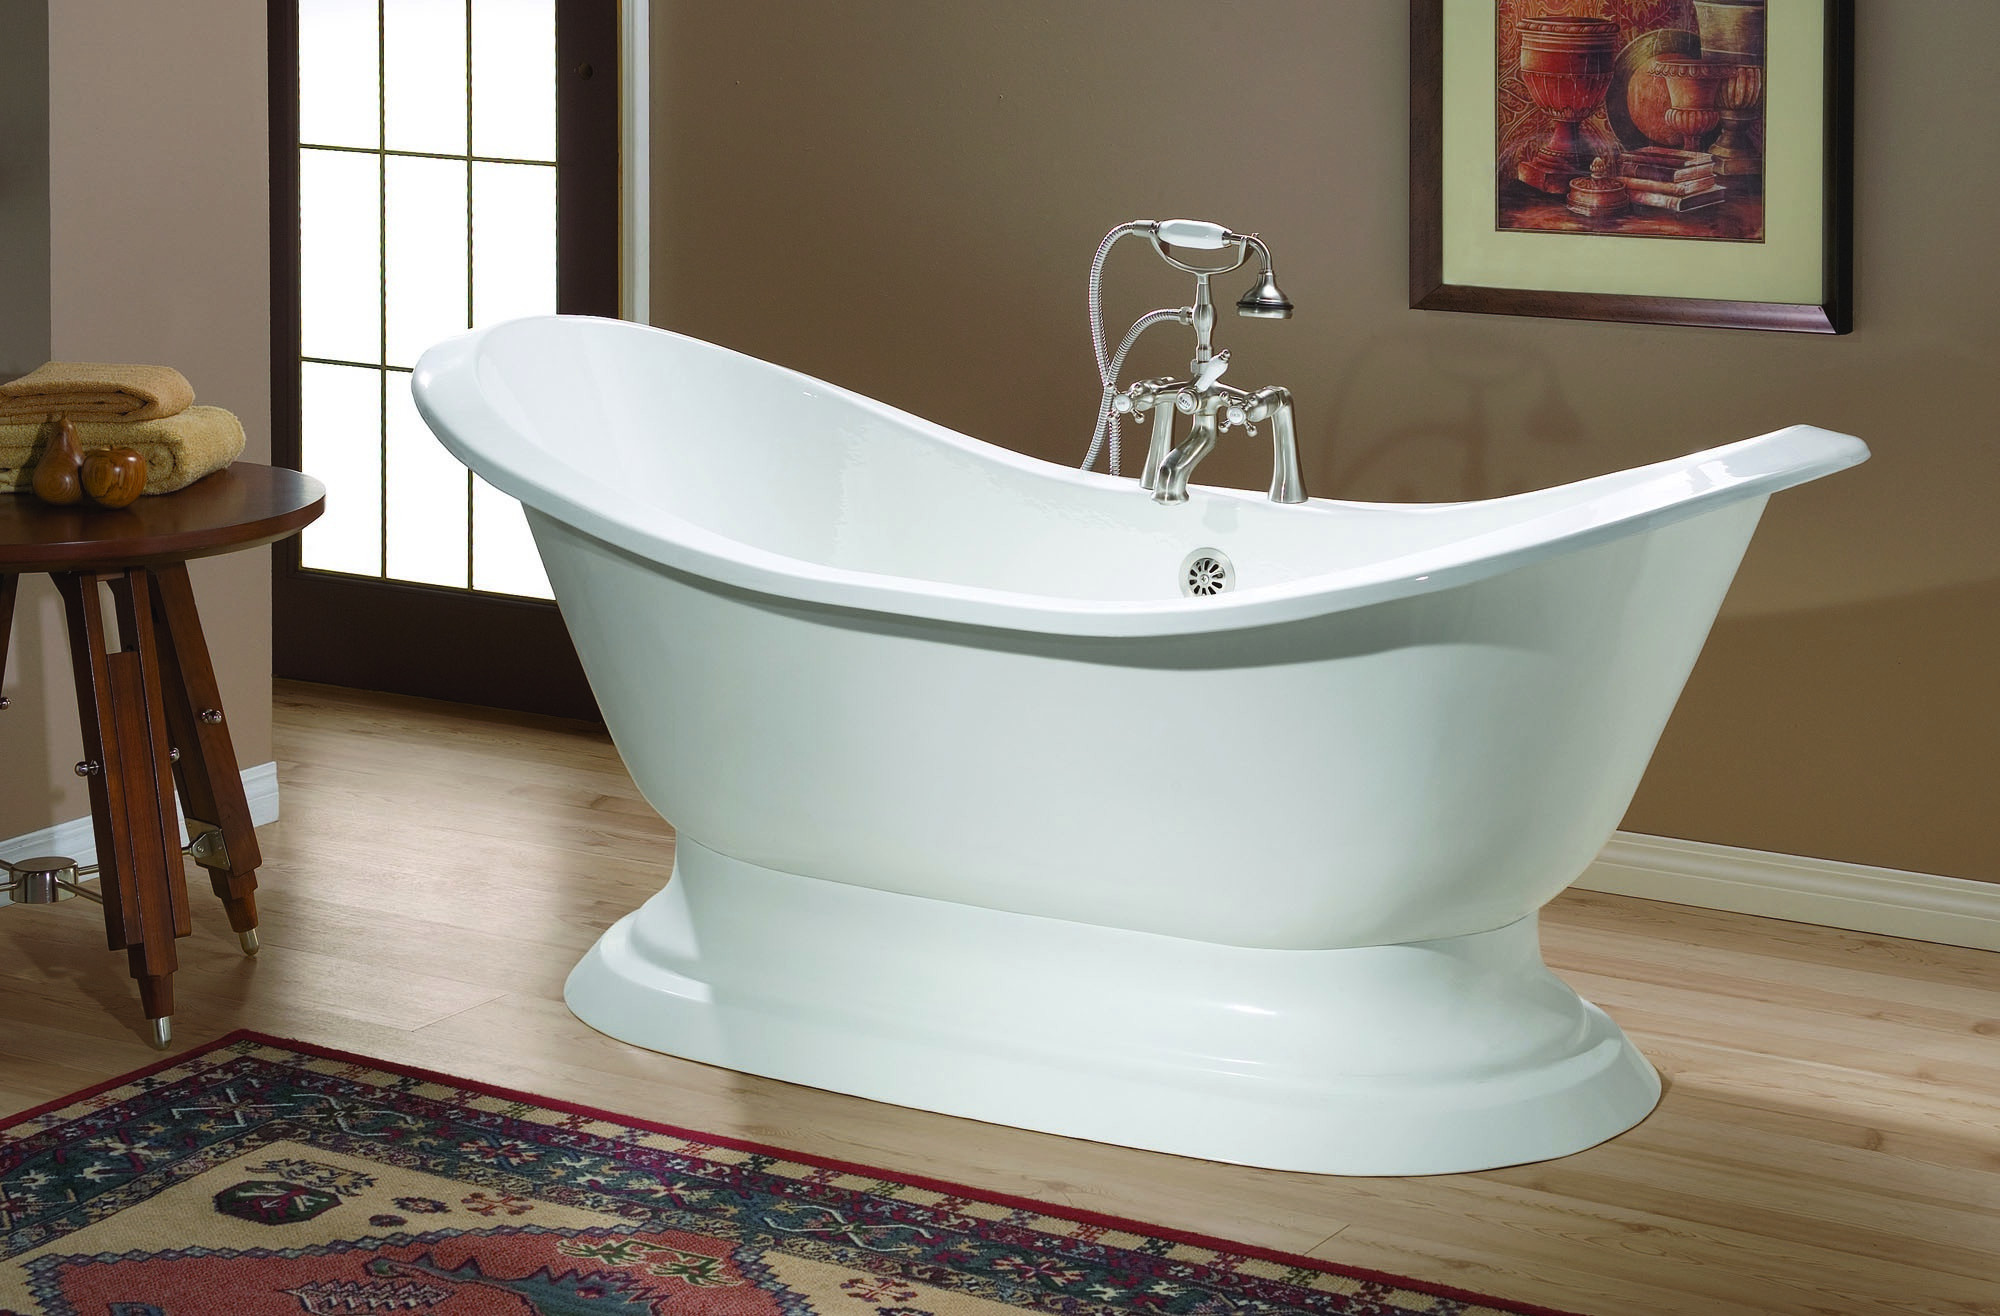 Cheviot 2153-BB-8 Cast Iron Pedestal Bathtub with Faucet Holes Drilled at 8 Inch